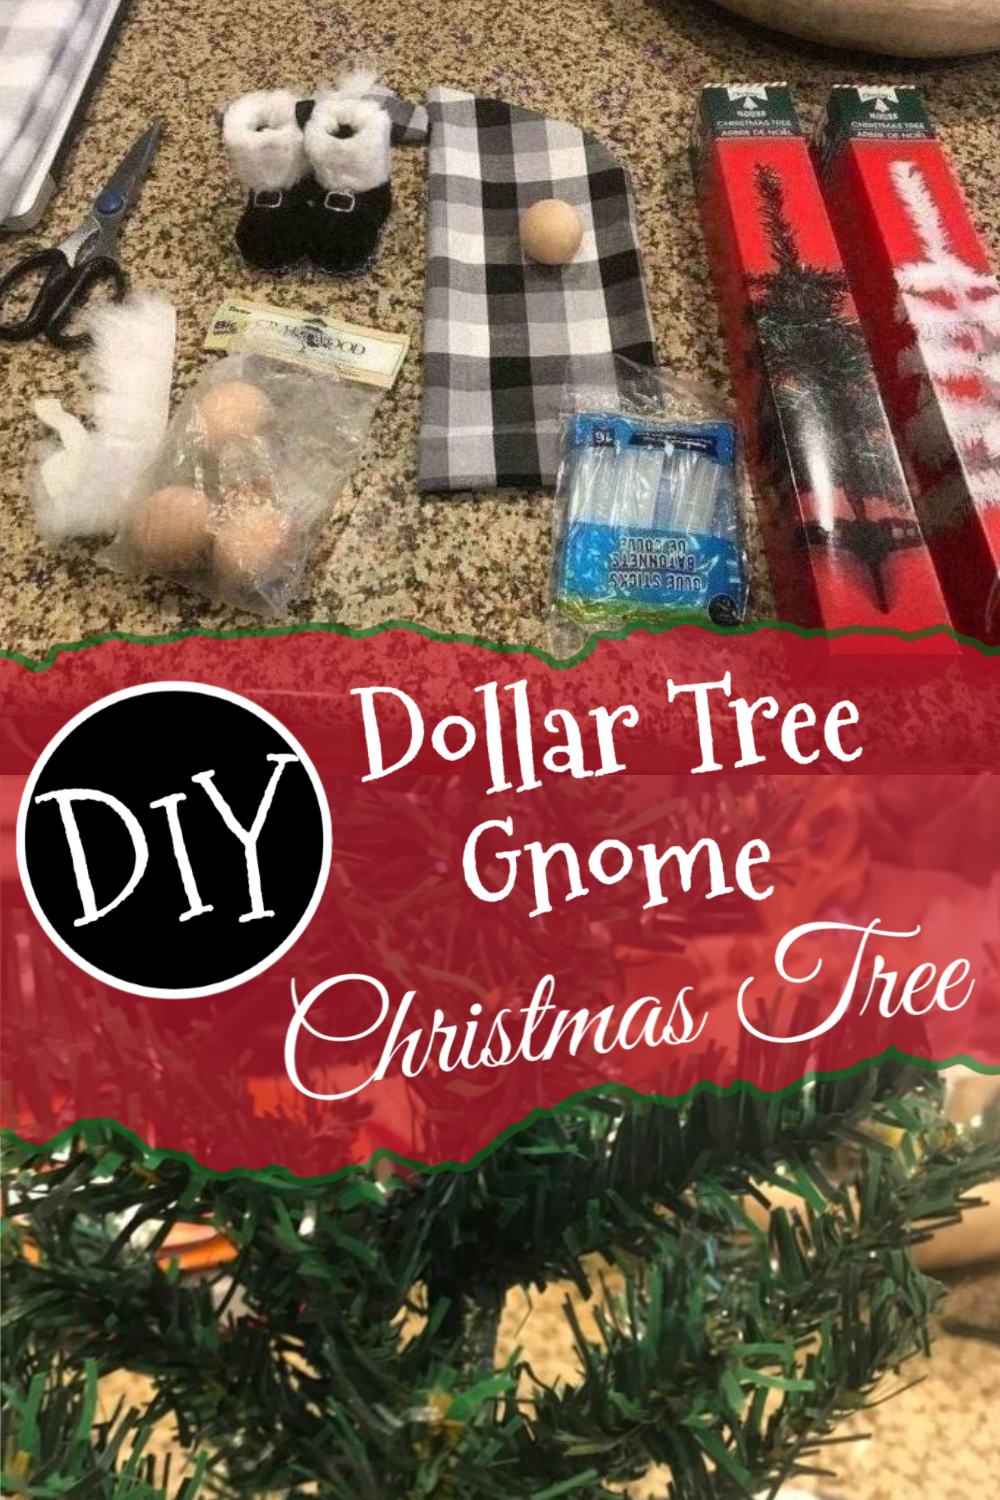 18 diy christmas decorations dollar store for kids ideas